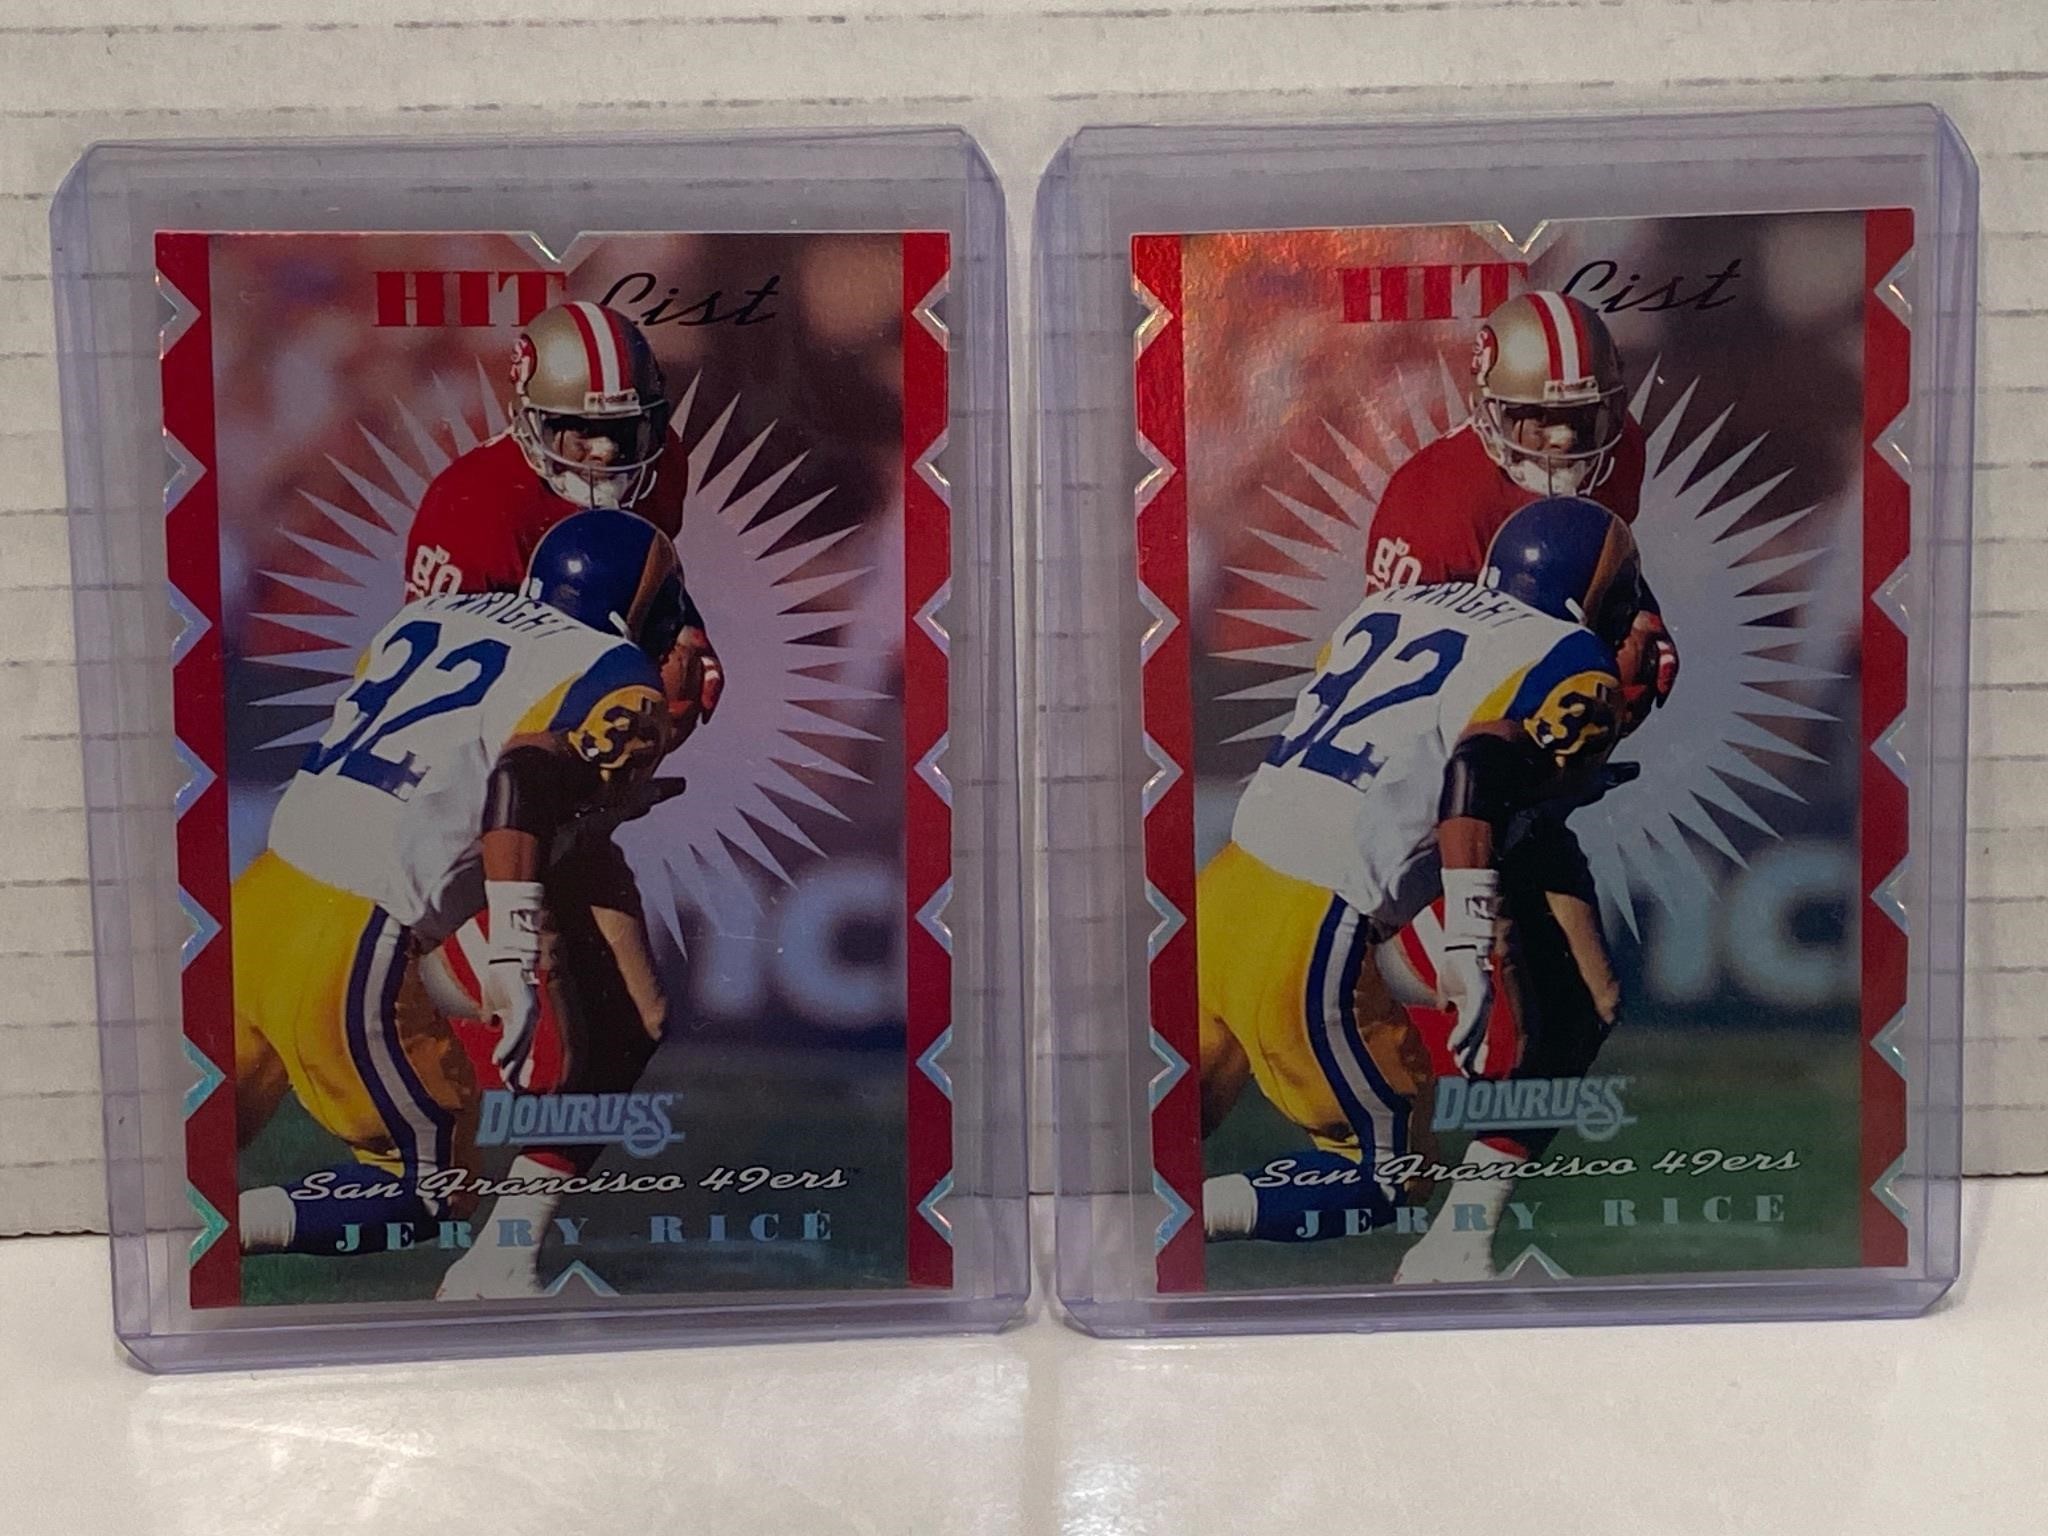 Jerry Rice Die-Cut Promo Cards